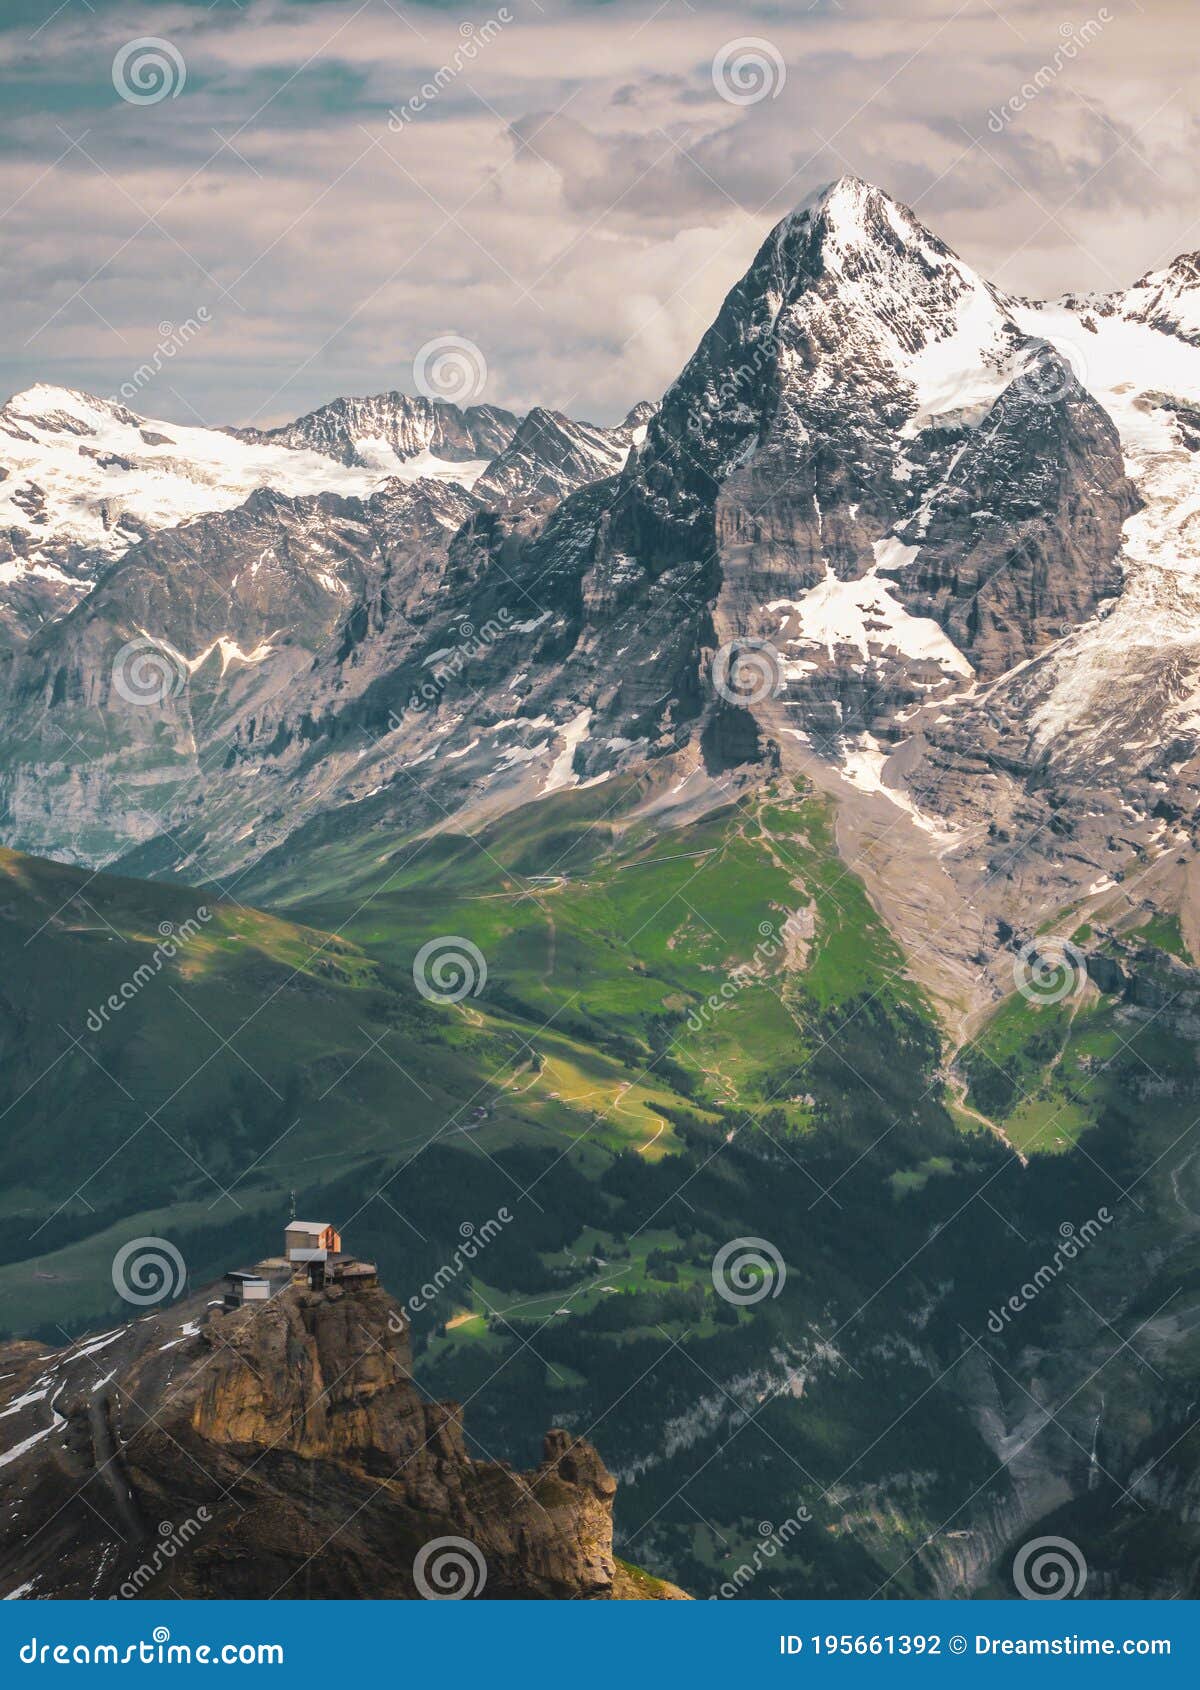 A Mountain Hut At The Edge Of A Cliff With A Green Valley Below And